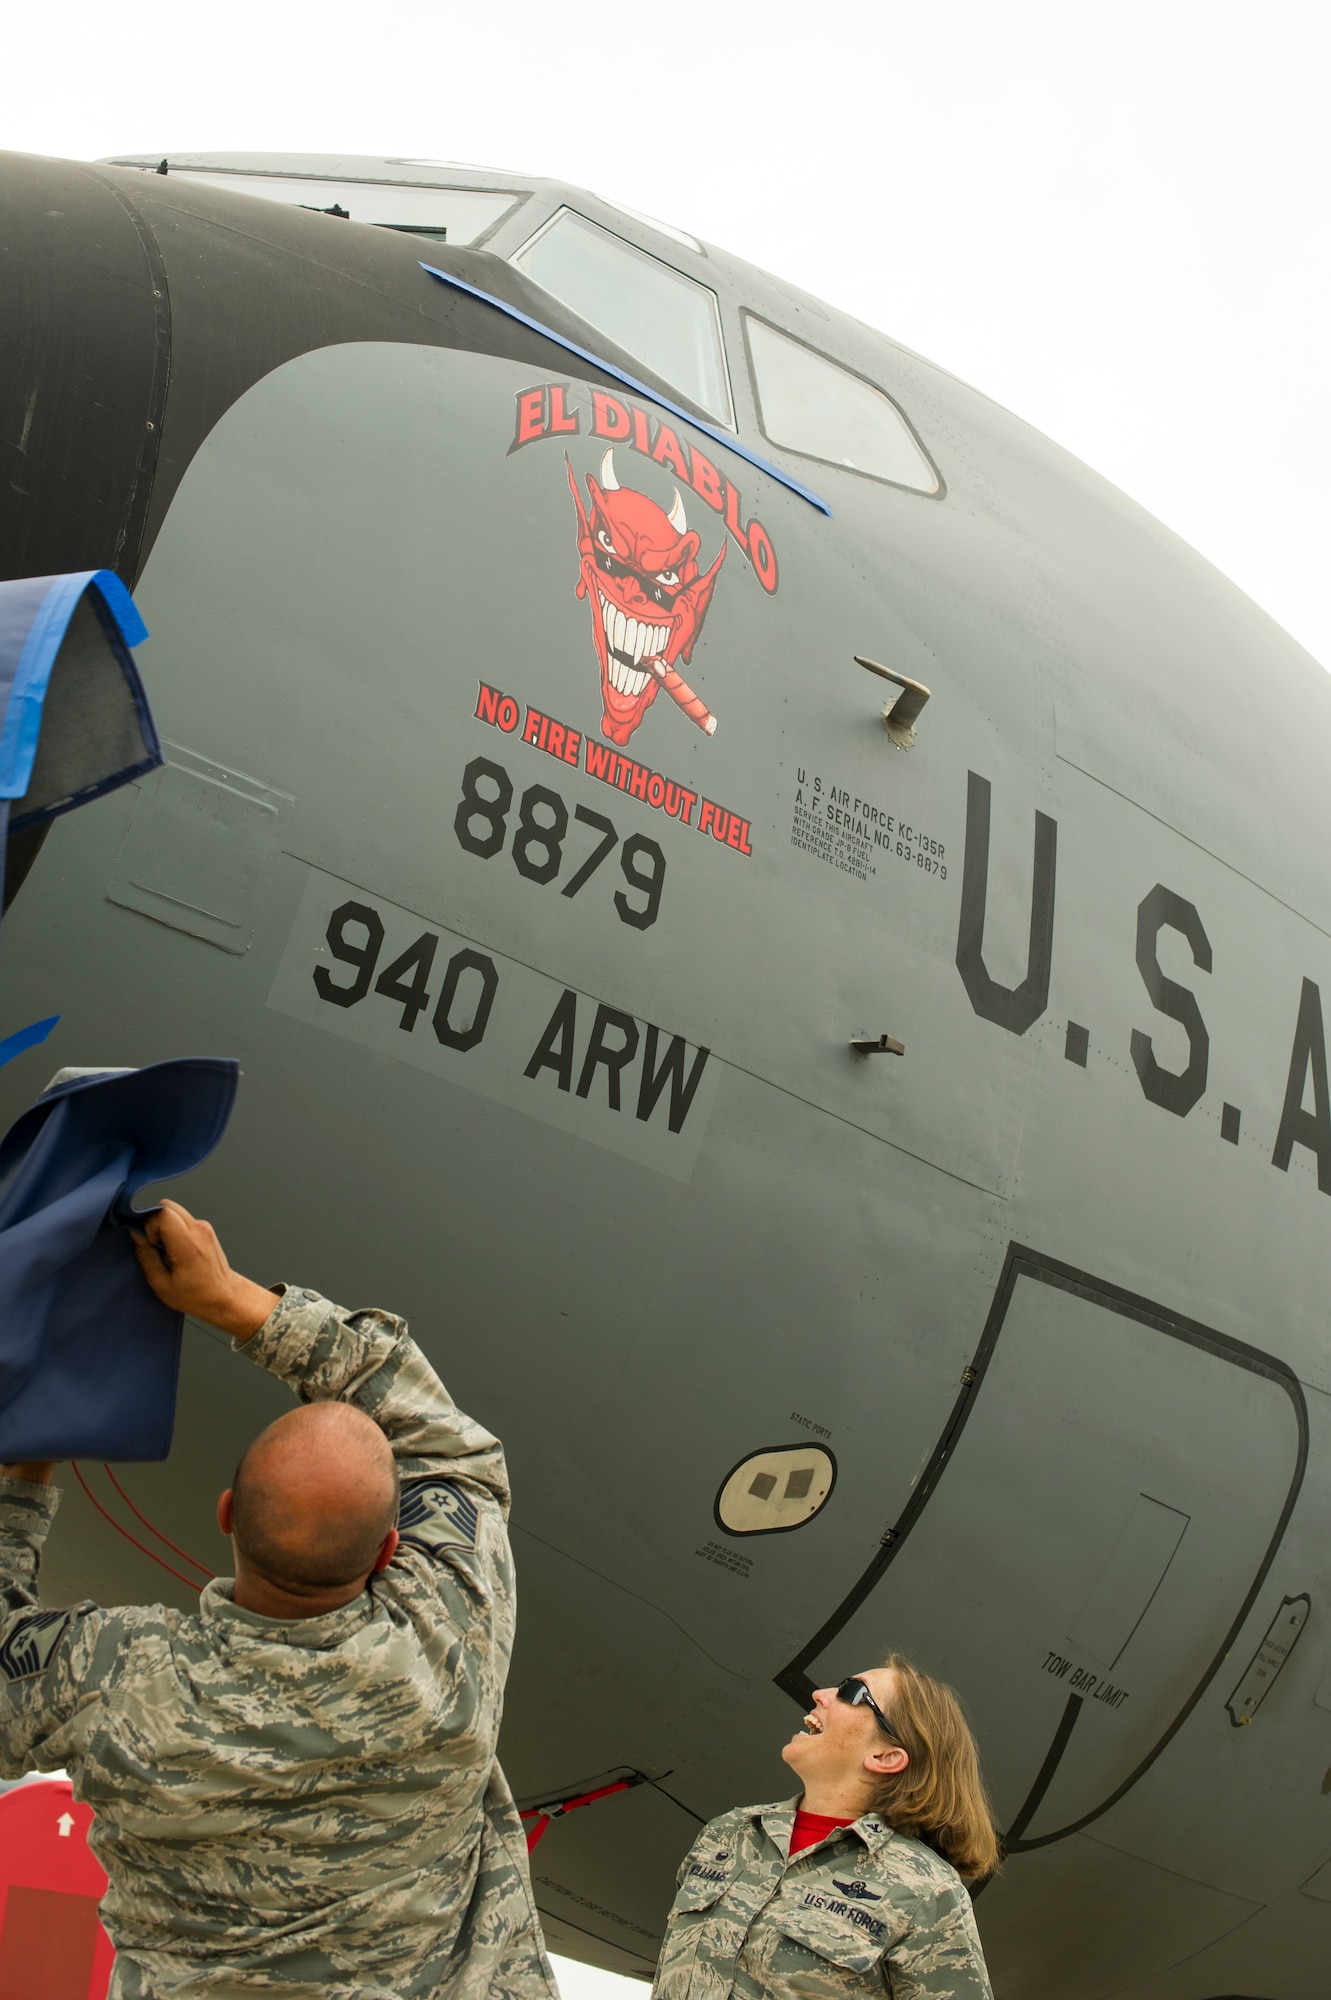 Master Sgt. Joe Simpson, 940th Aircraft Maintenance Squadron dedicated crew chief, and Col. Stephanie W. Williams, 940th Air Refueling Wing commander, uncover the “El Diablo” nose art on a KC-135 Stratotanker May 5 at Beale Air Force Base, California.